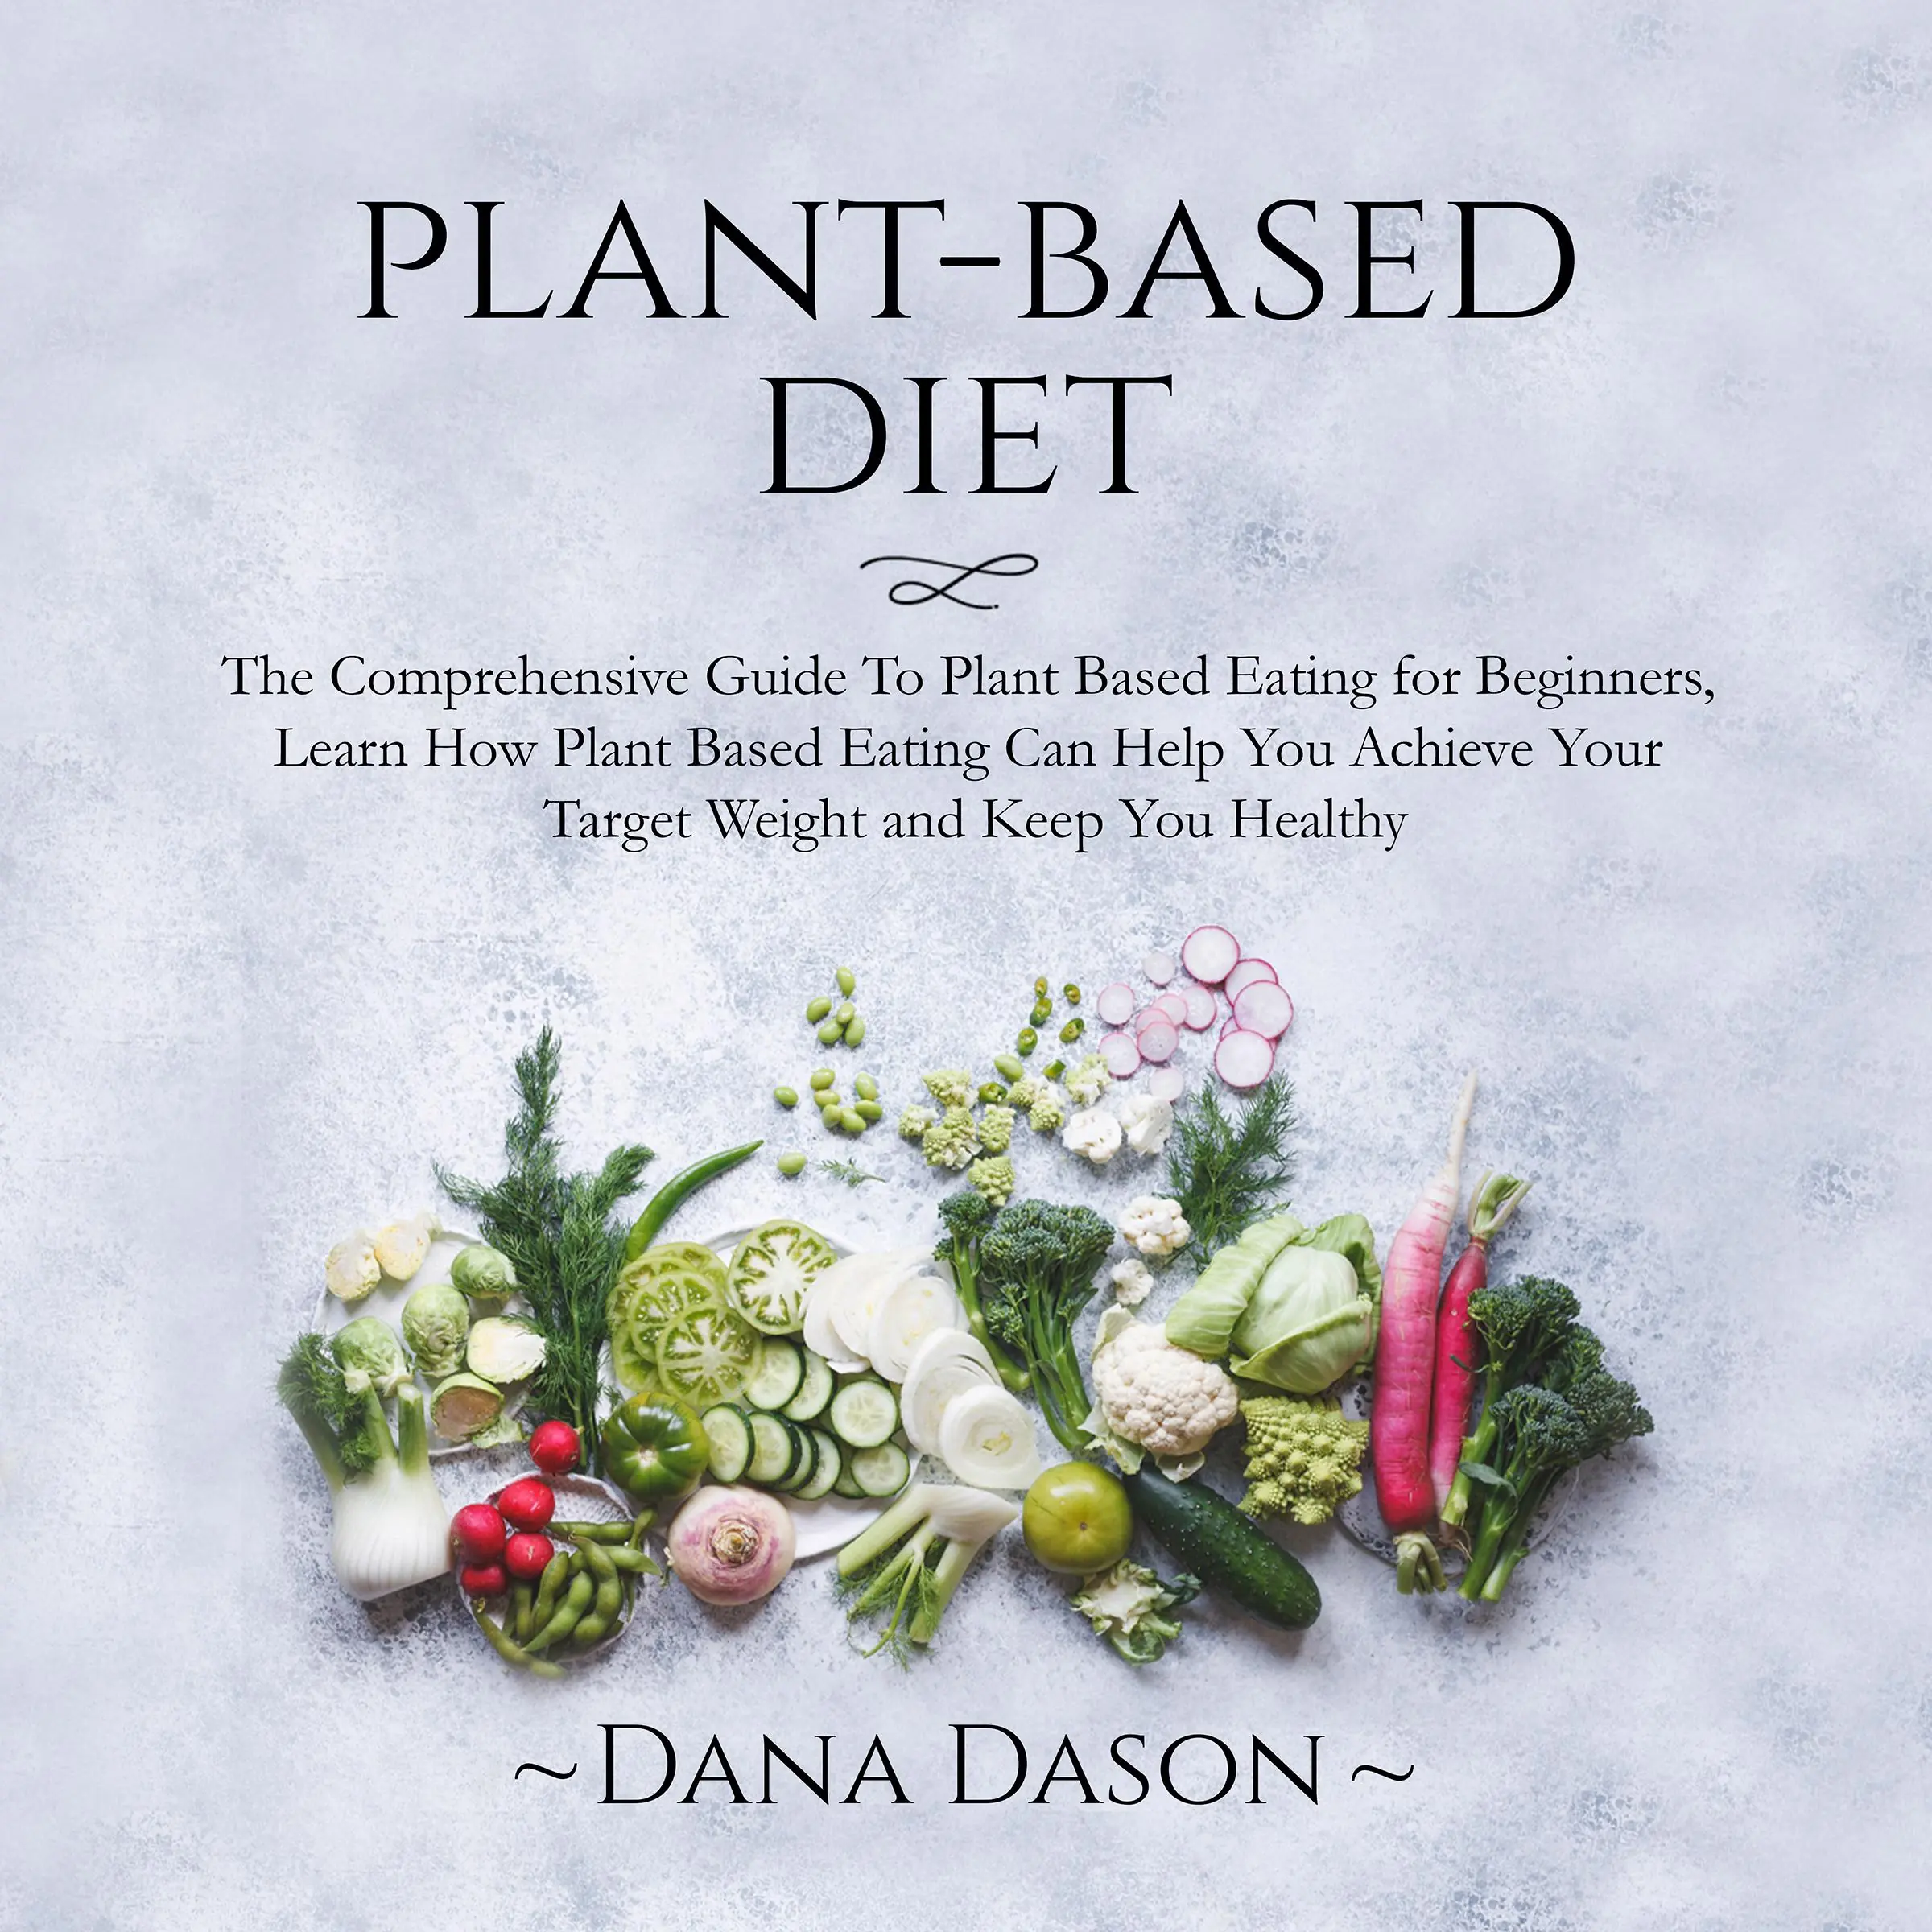 Plant Based Diet: The Comprehensive Guide To Plant Based Eating for Beginners, Learn How Plant Based Eating Can Help You Achieve Your Target Weight and Keep You Healthy Audiobook by Dana Dason